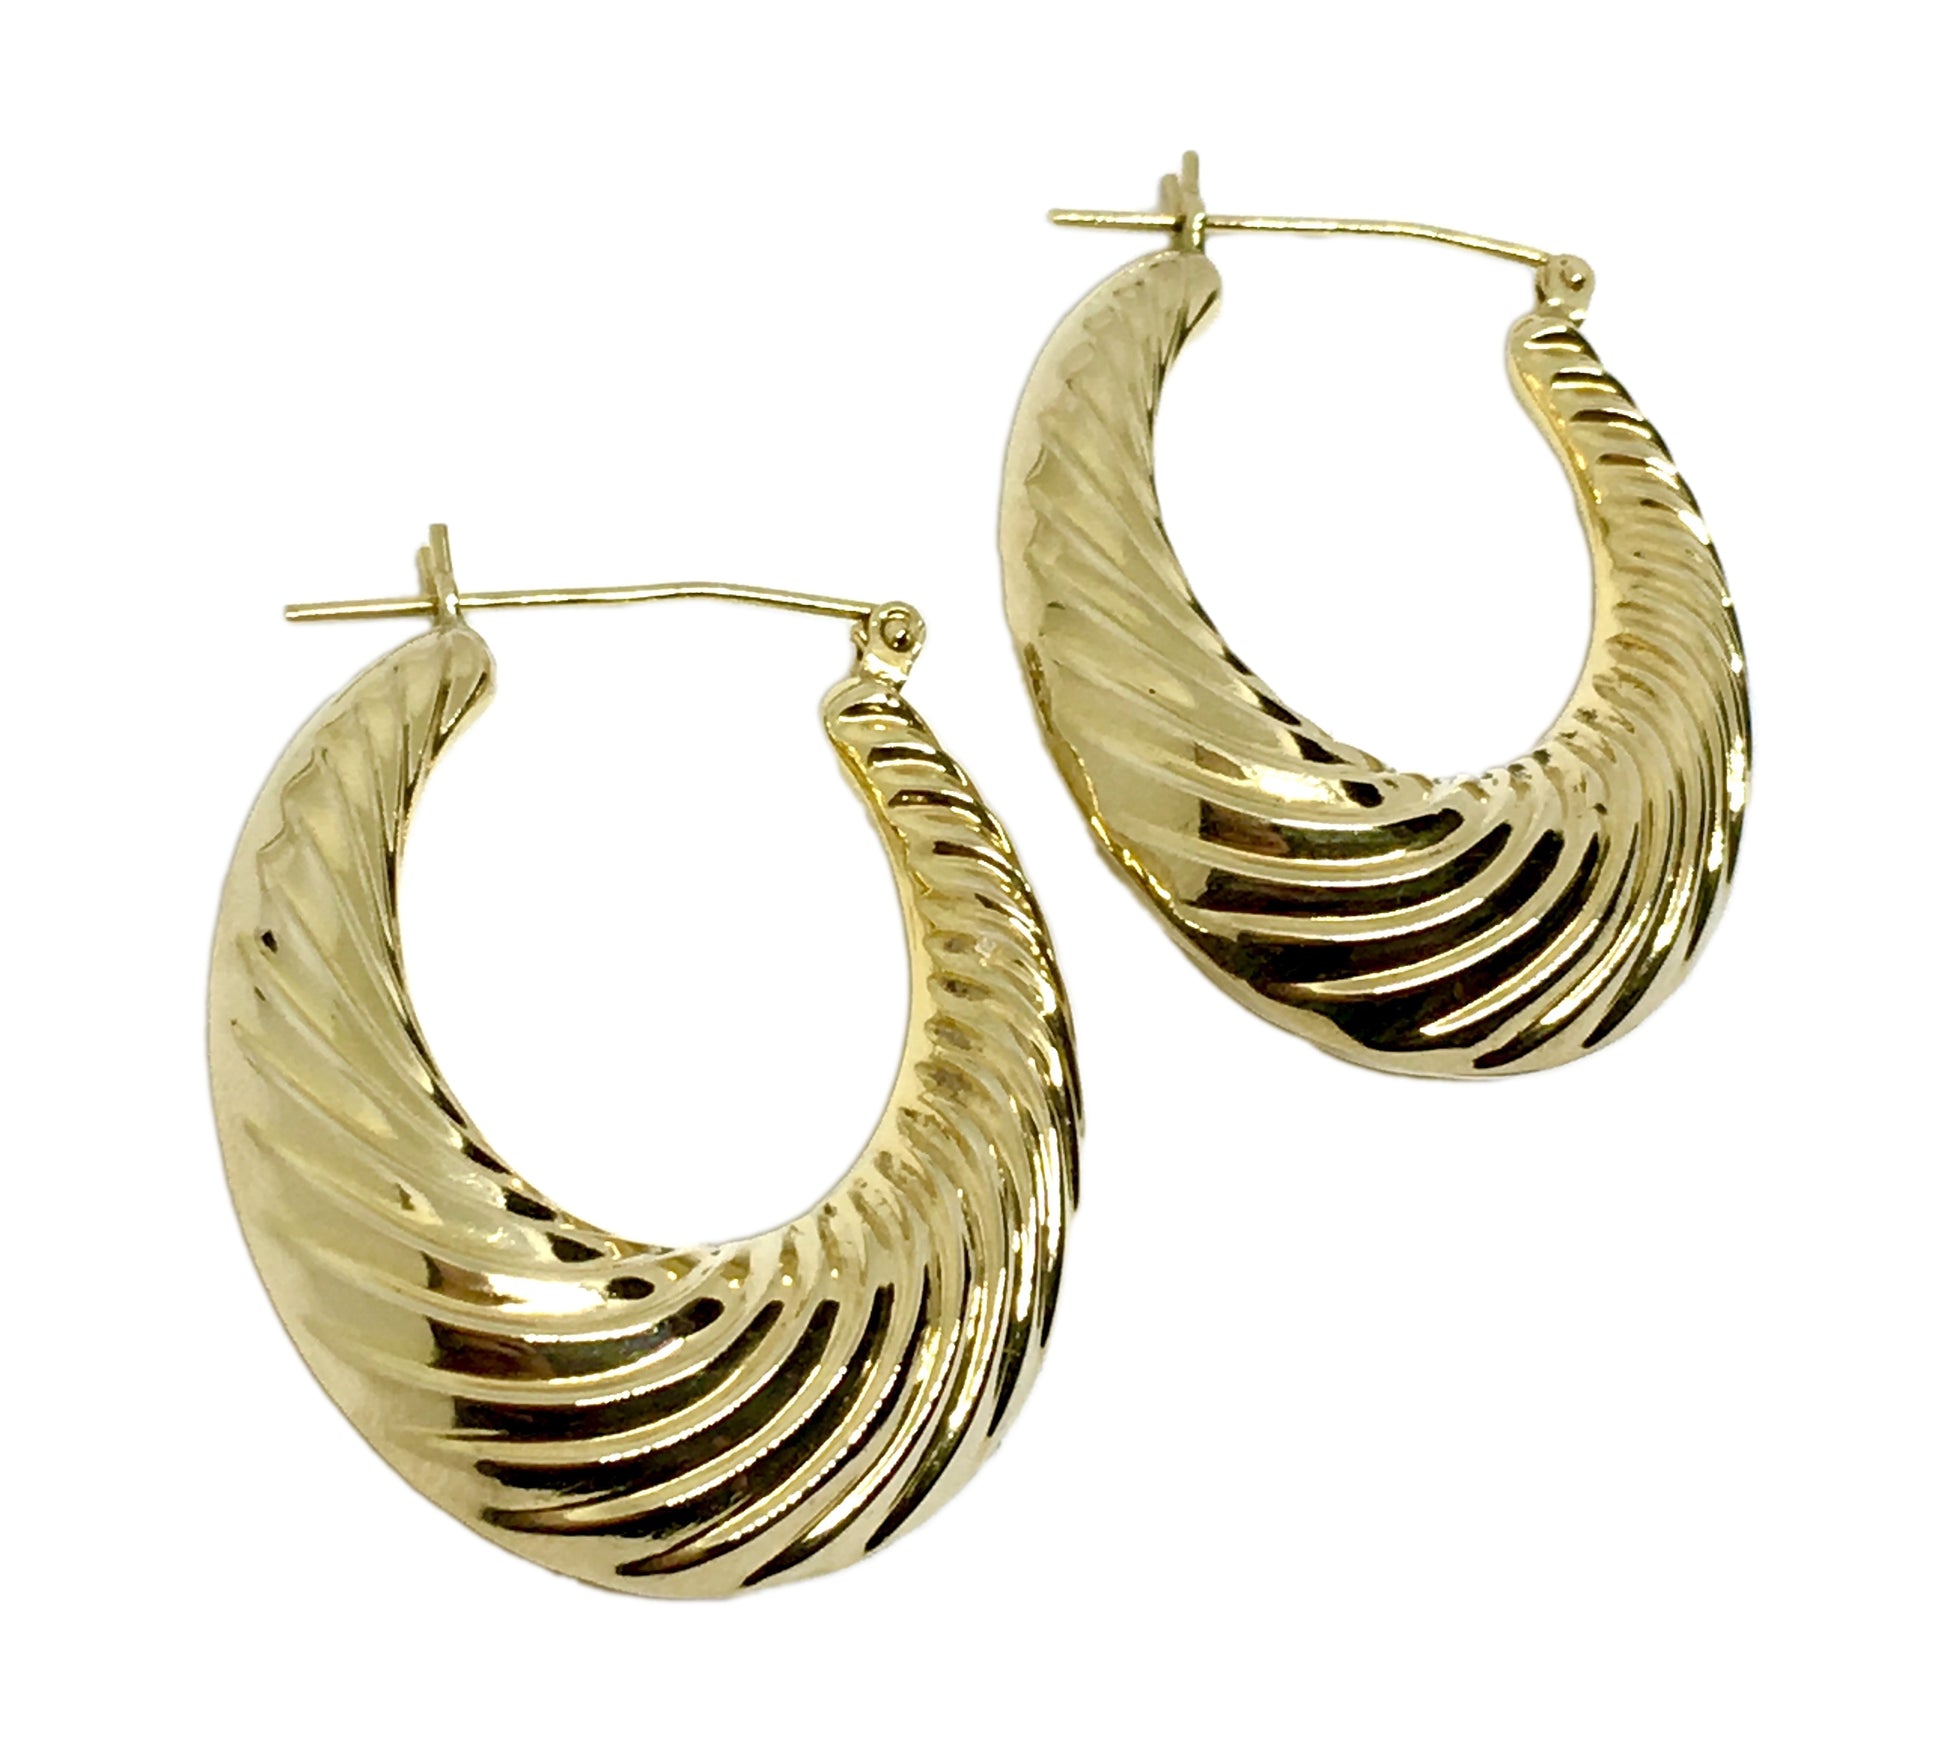 Used Jewelry - Fancy 14k Gold 37 mm Ribbed Horseshoe Style Hoop Earrings - online at Blingschlingers.com USA